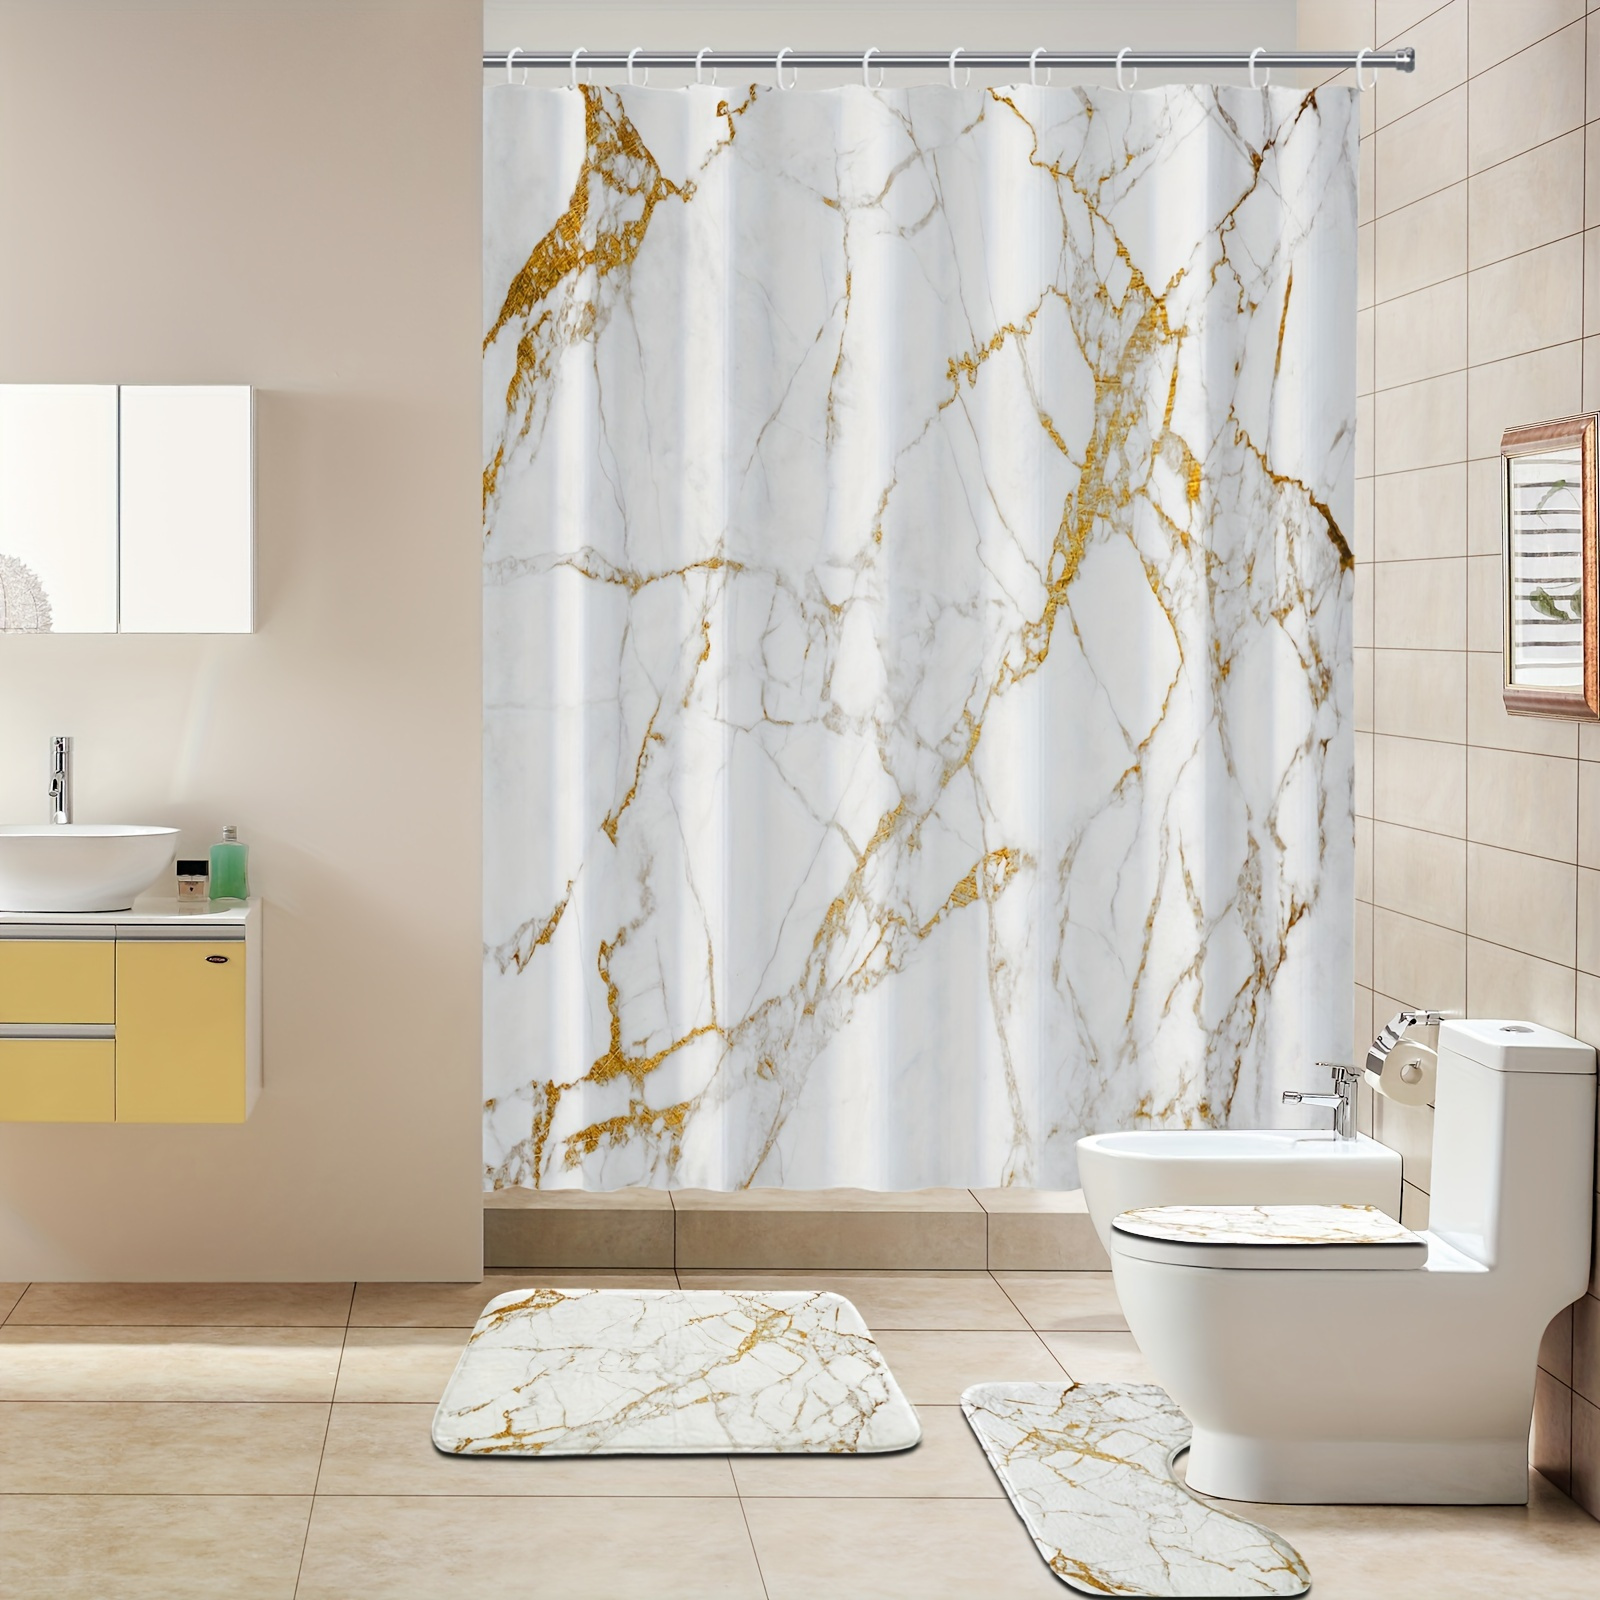 

Luxurious White Marble Textured Bath Set: 71"x71" Shower Curtain, 12 Plastic Hooks, Soft Fabric Bathroom Rug, And Toilet Seat Cover - Modern, Waterproof, And Stylish Bathroom Decor